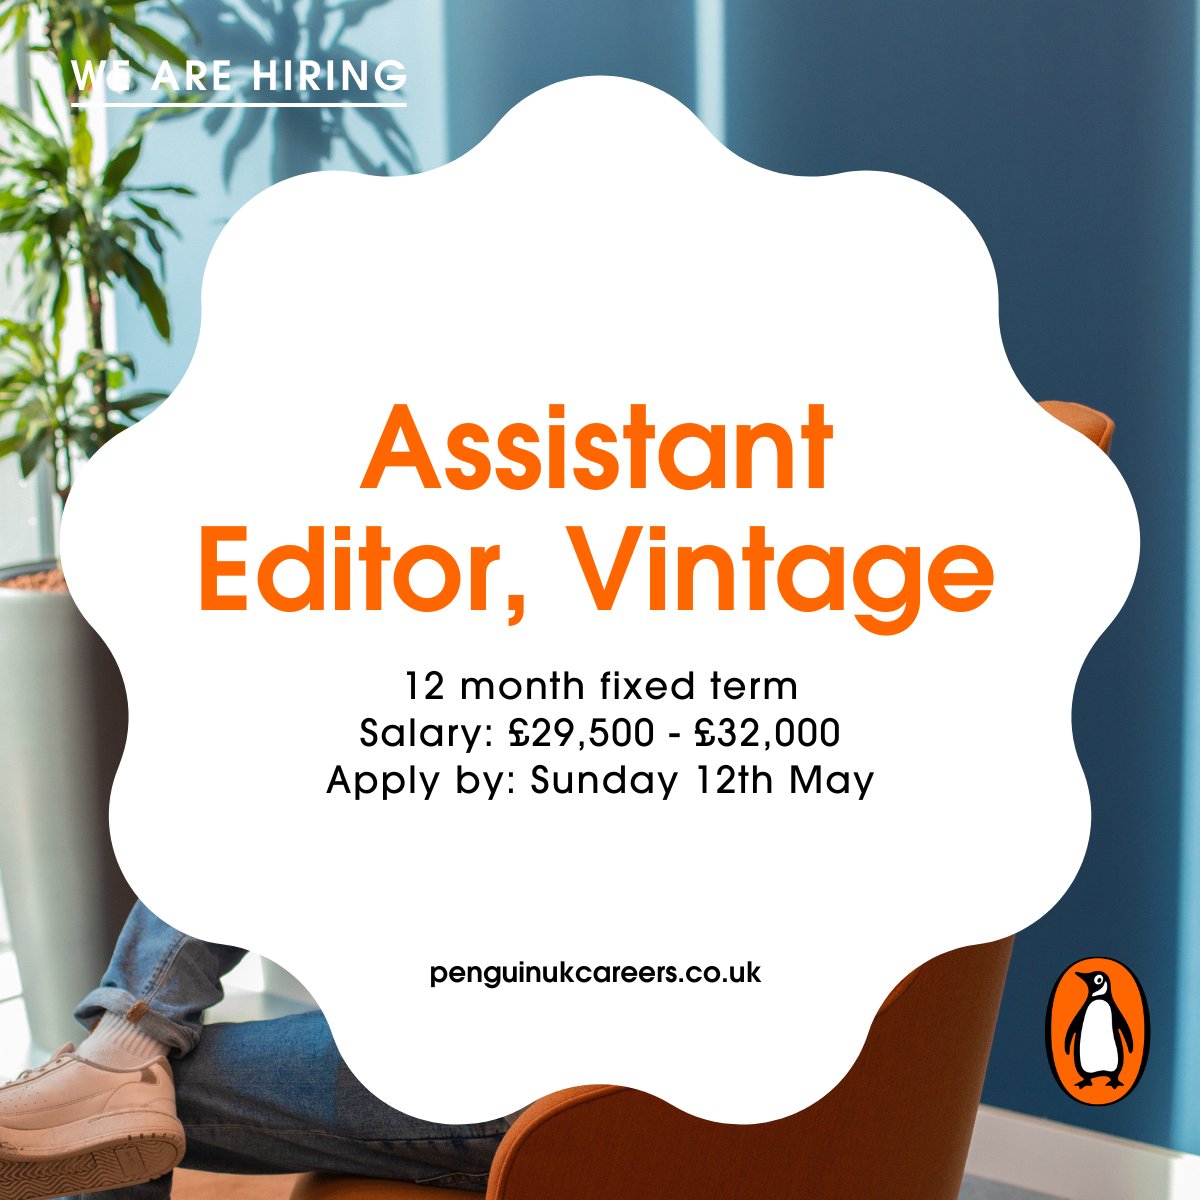 Are you a highly efficient individual with a can-do, enthusiastic attitude? We are looking for a curious, proactive and energetic Assistant Editor with in-house publishing experience to join team! Info: shorturl.at/DF389